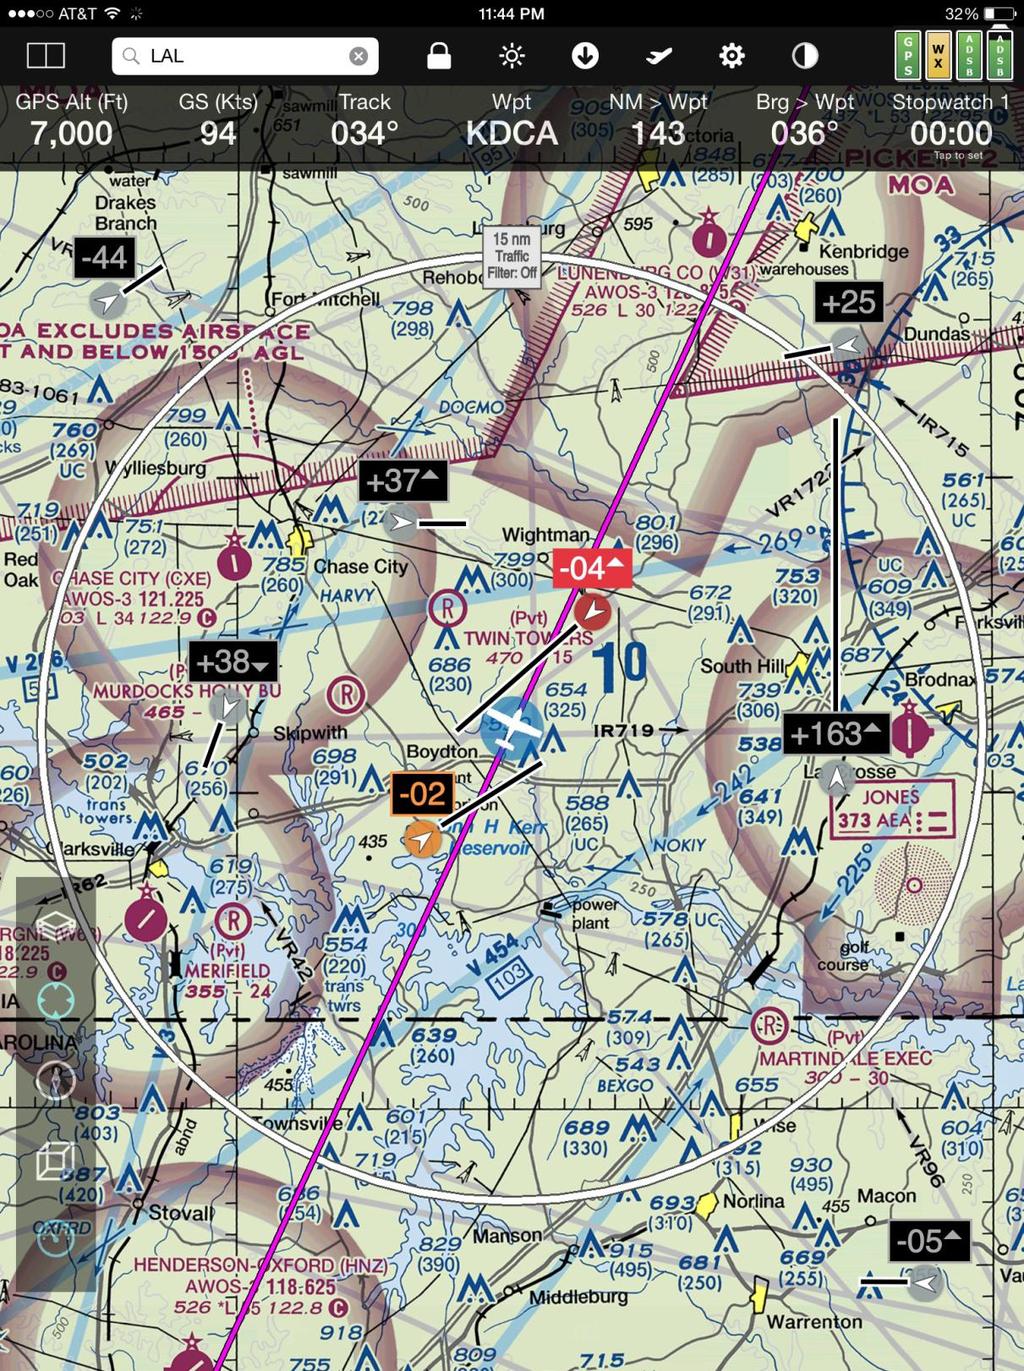 Traffic in FlyQ EFB Important! ADS-B traffic is a map layer in FlyQ EFB, like any other map layer such as Radar, METARs, Obstacles, etc. By default, Traffic is not on.